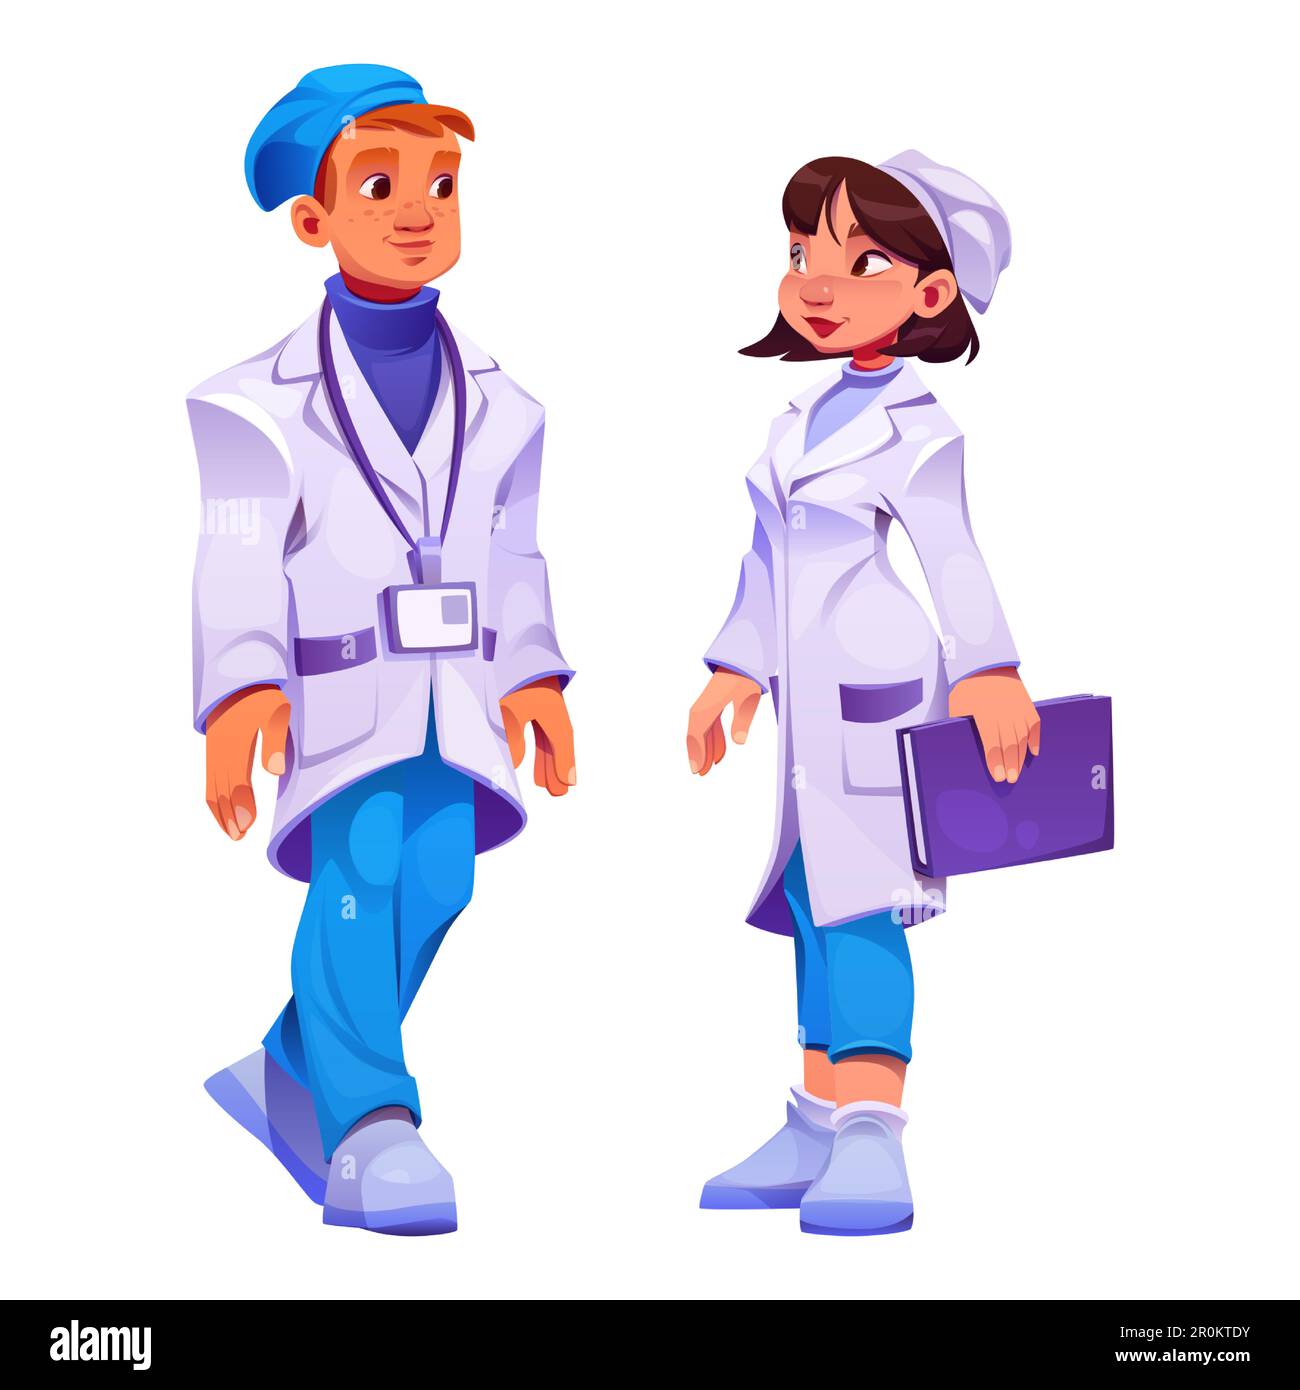 Cartoon set of medical personnel isolated on white background. Vector illustration of multiethnic male and female young doctors and nurses character in hospital uniform. Health care clinic services Stock Vector